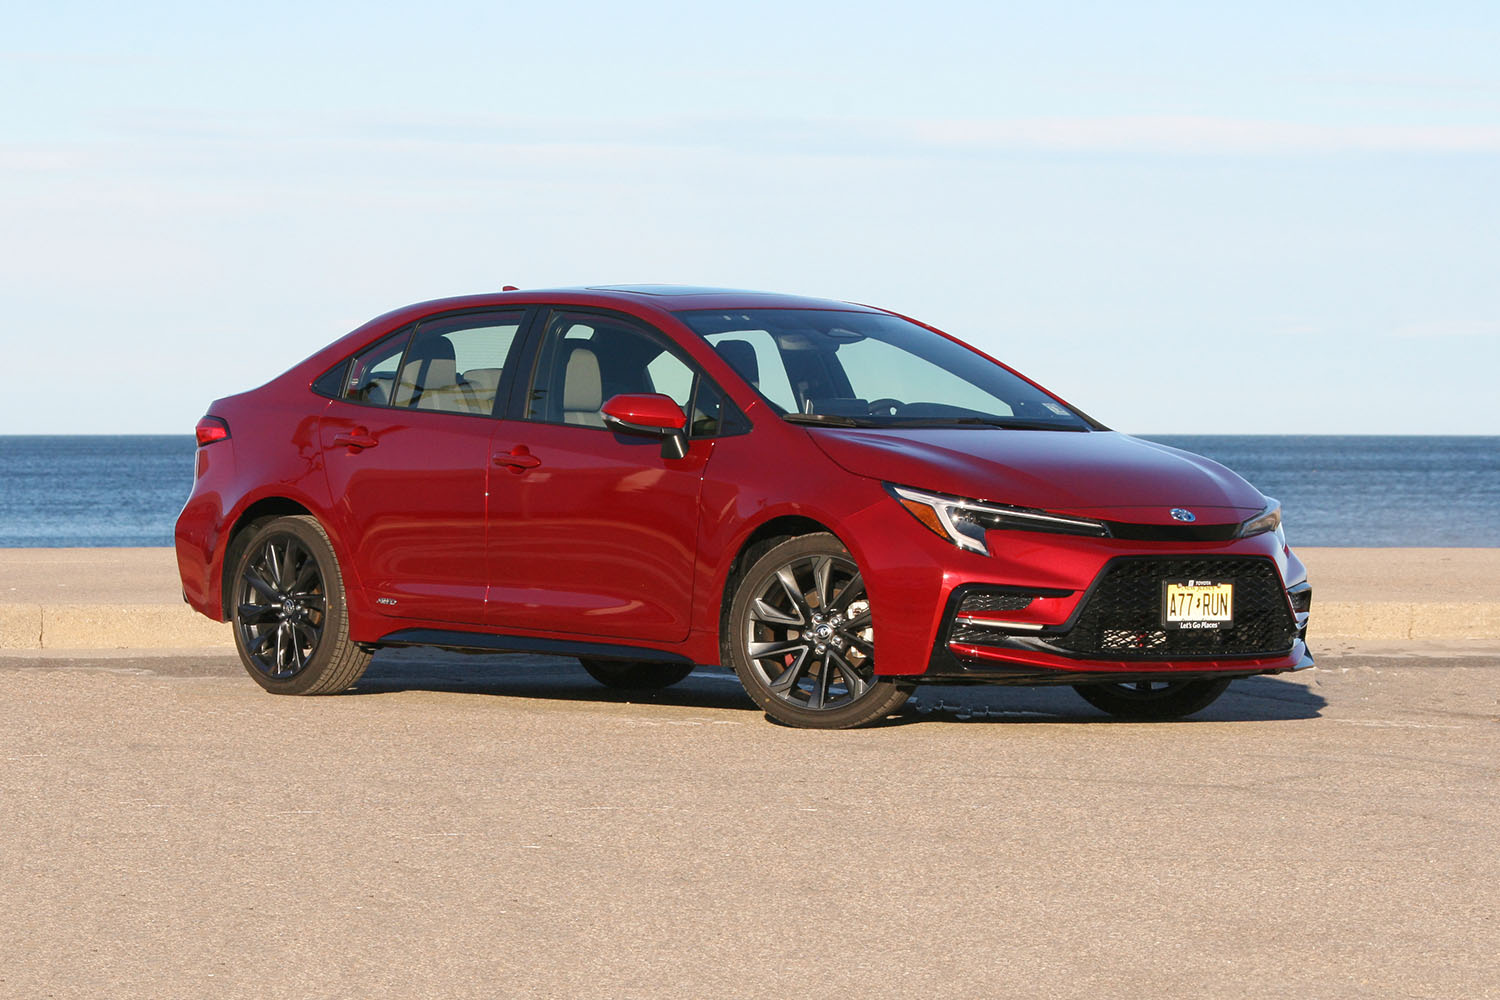 https://autoimage.capitalone.com/cms/Auto/assets/images/2282-hero-2023-tyota-corolla-hybrid-review-and-test-drive.jpg